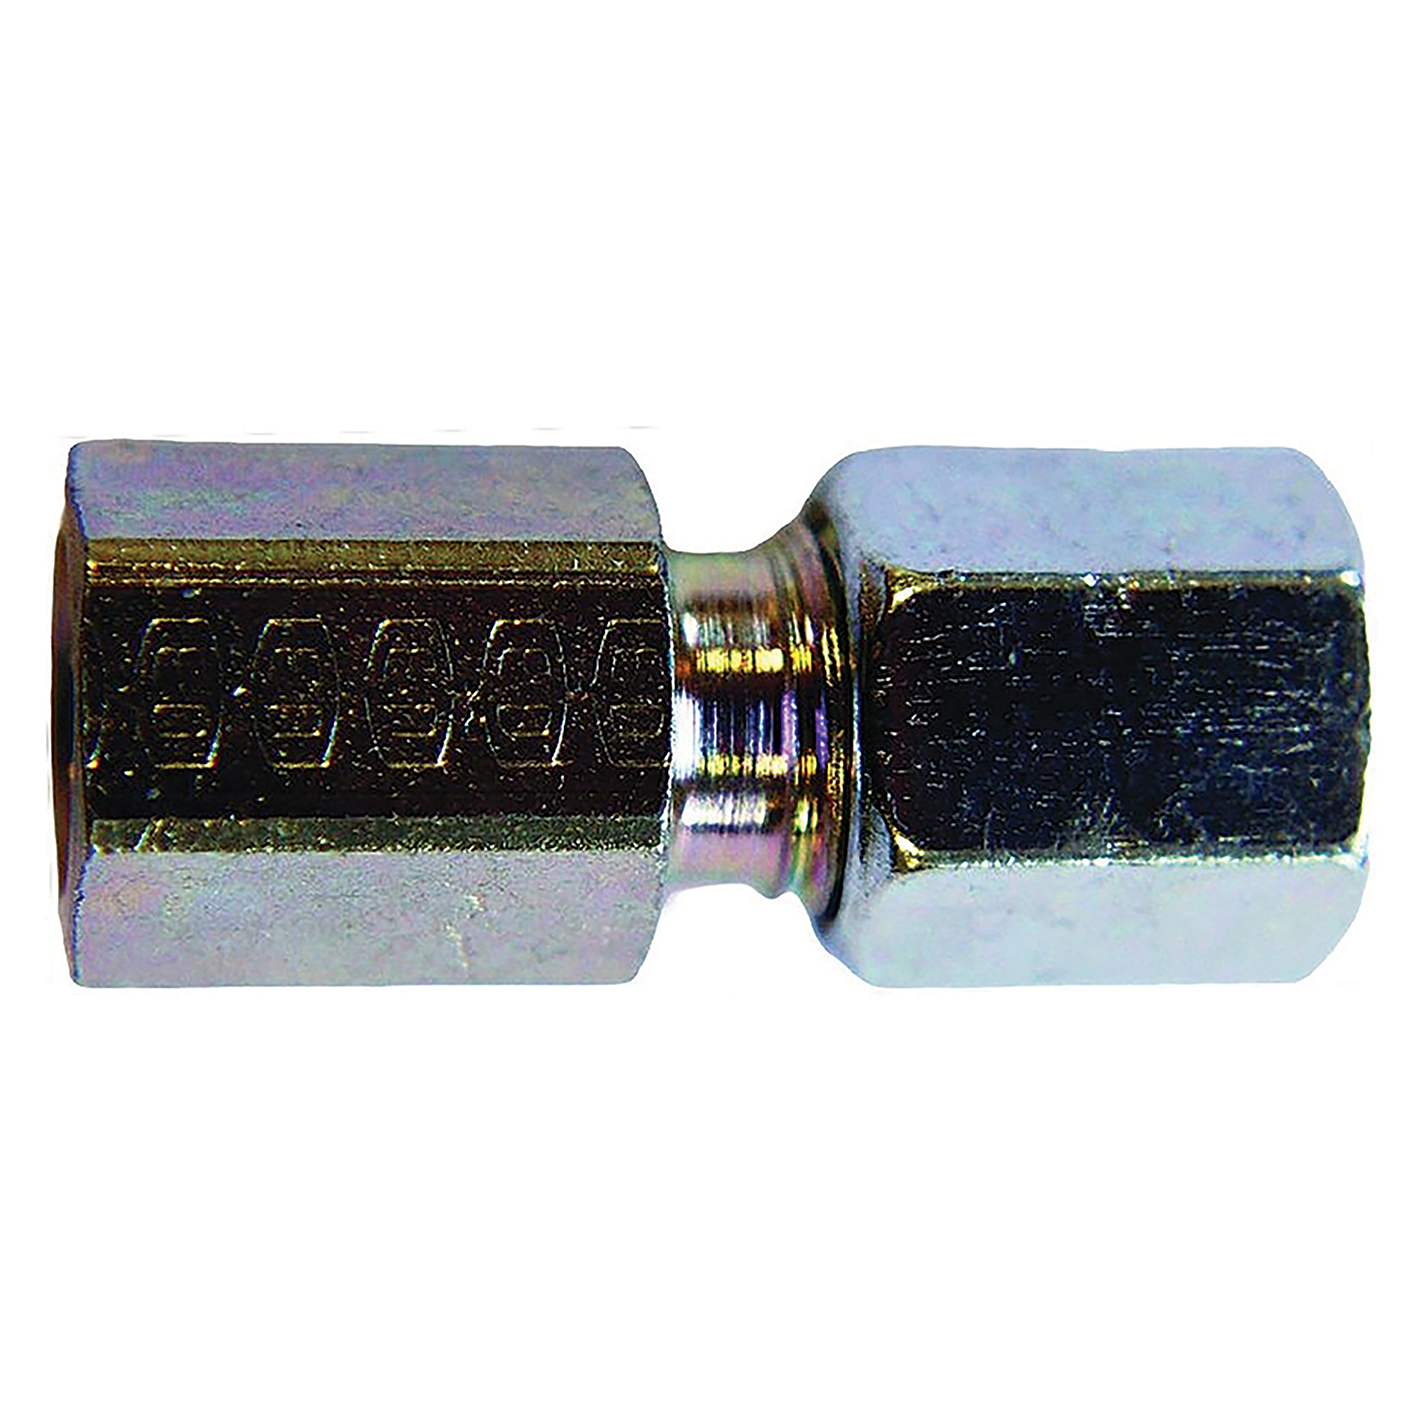 1.1/4" BSPP Female Female Connector 24° Cone End